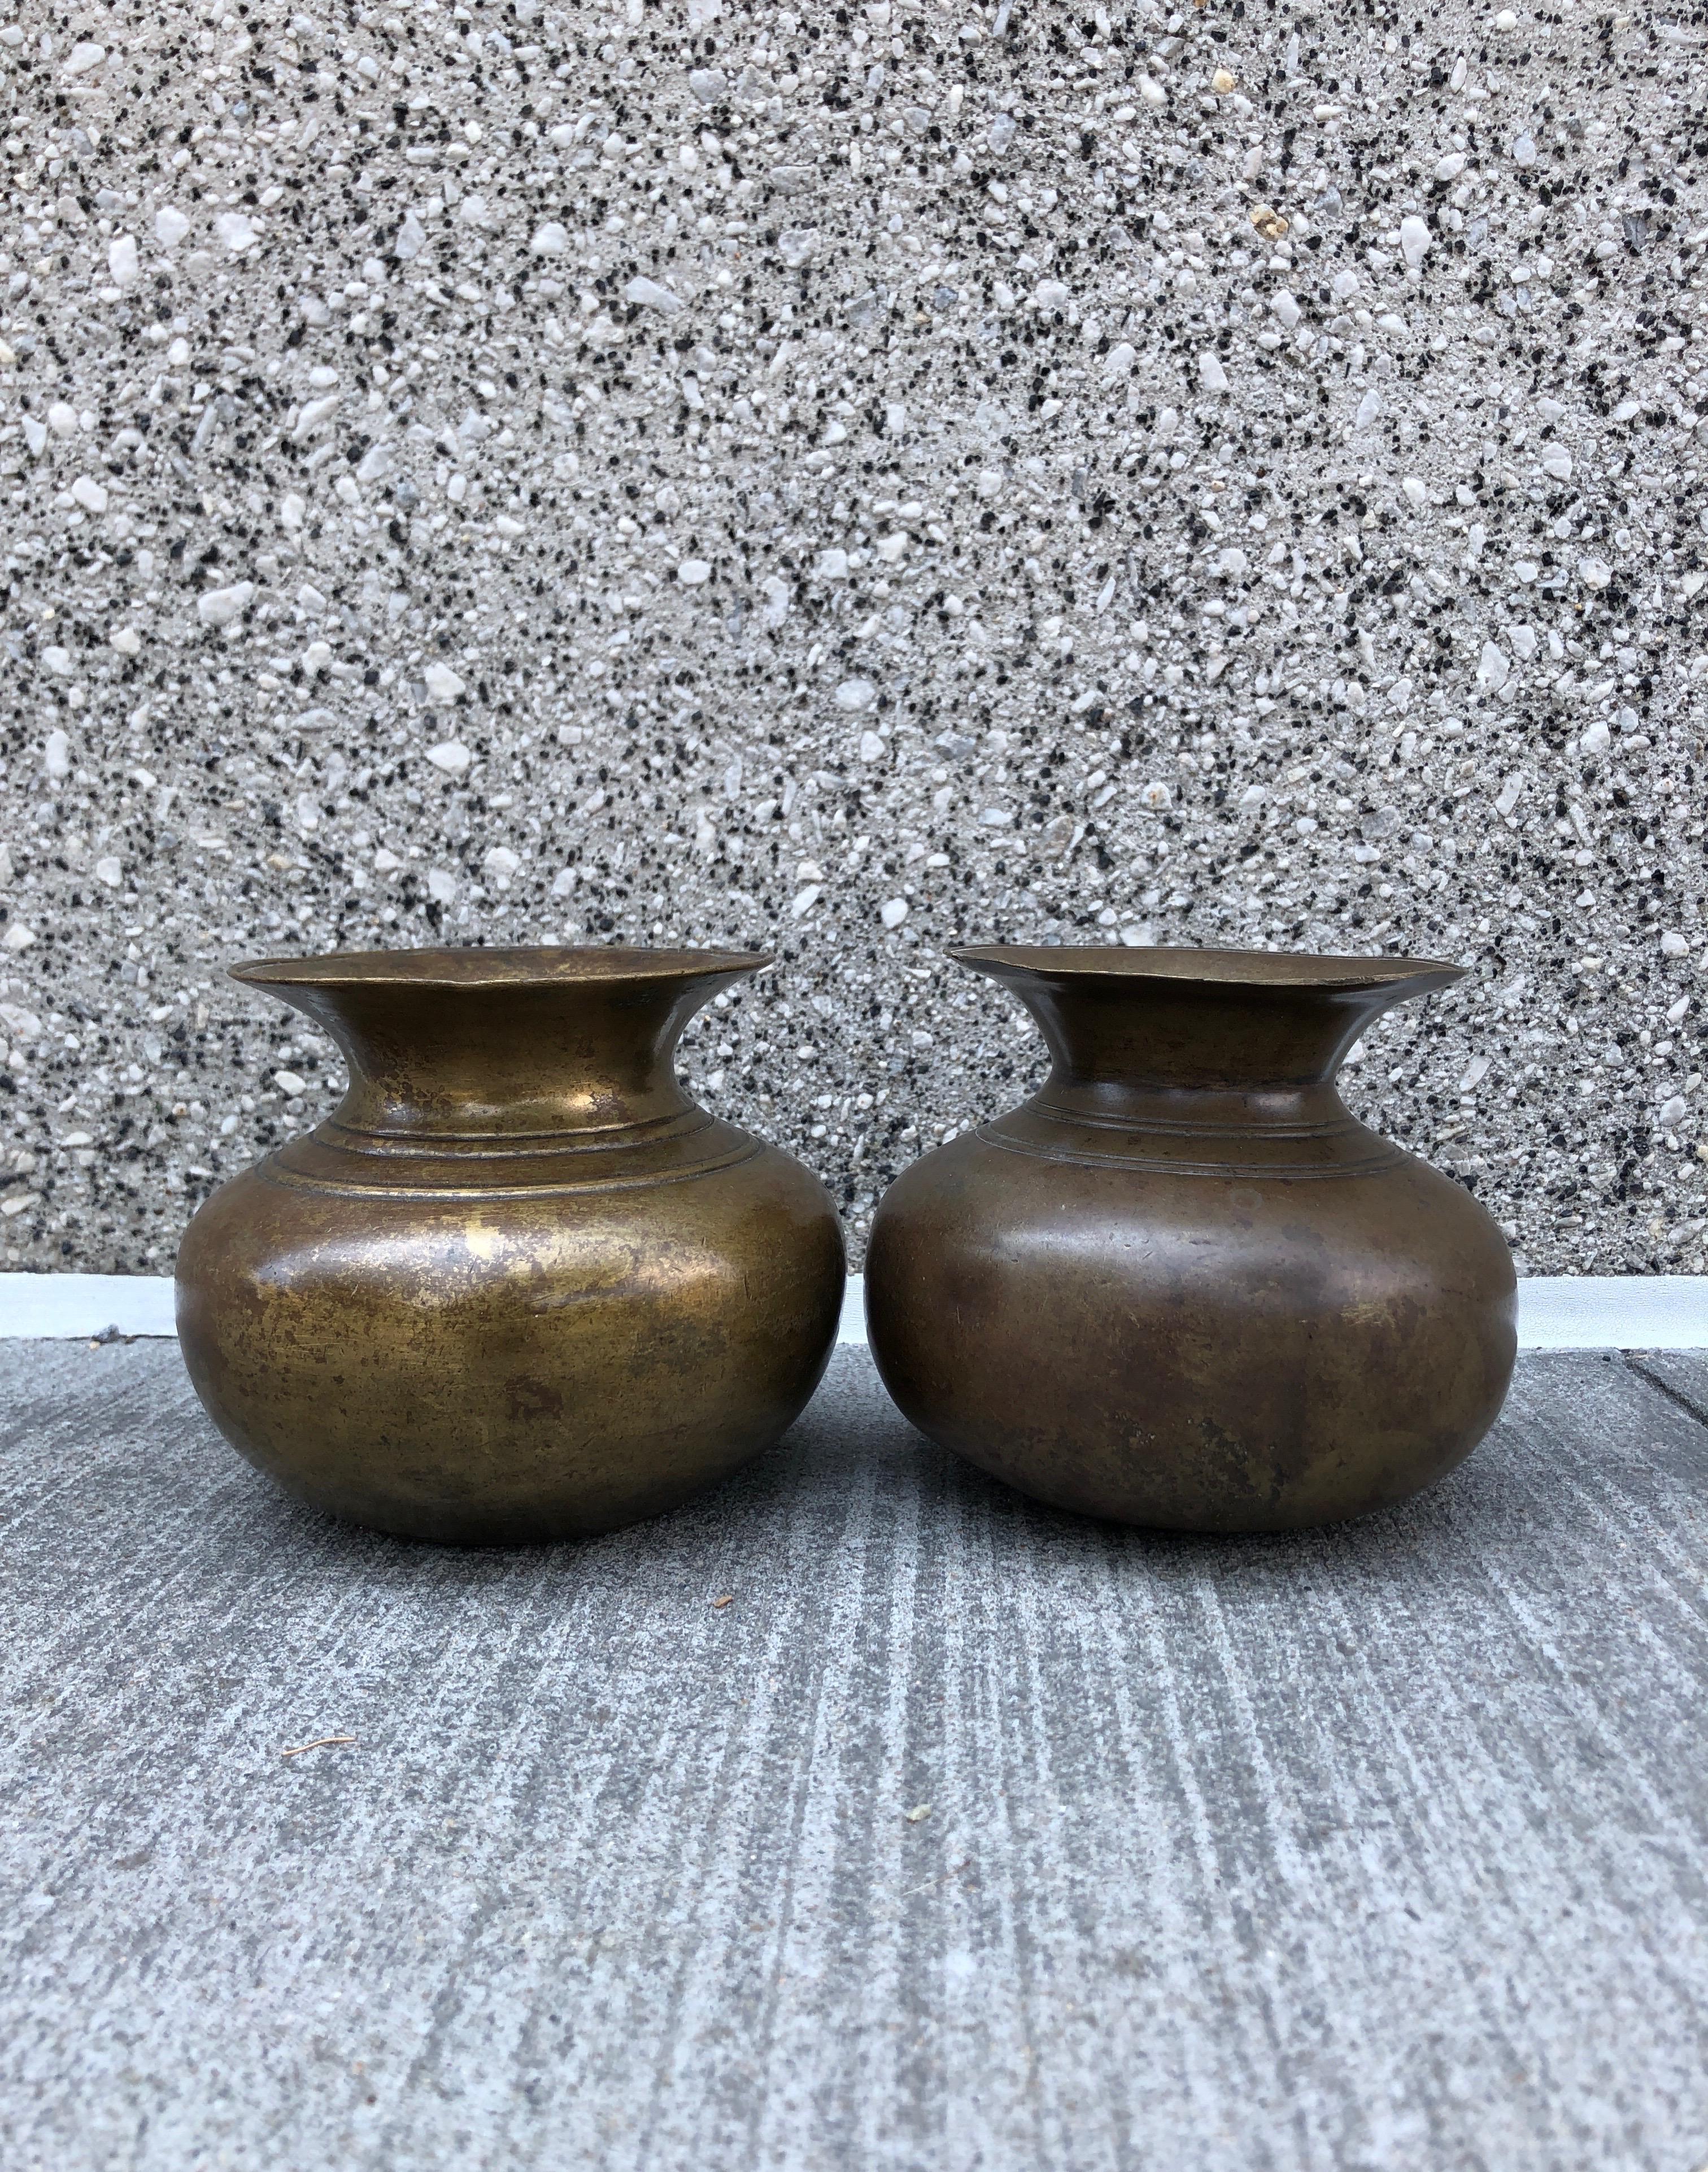 Two simple and classic antique bronze holy water containers from Nepal.
Both heavy bronze with great patina. Gorgeous, spiritual pieces. 
Priced and sold individually.
 